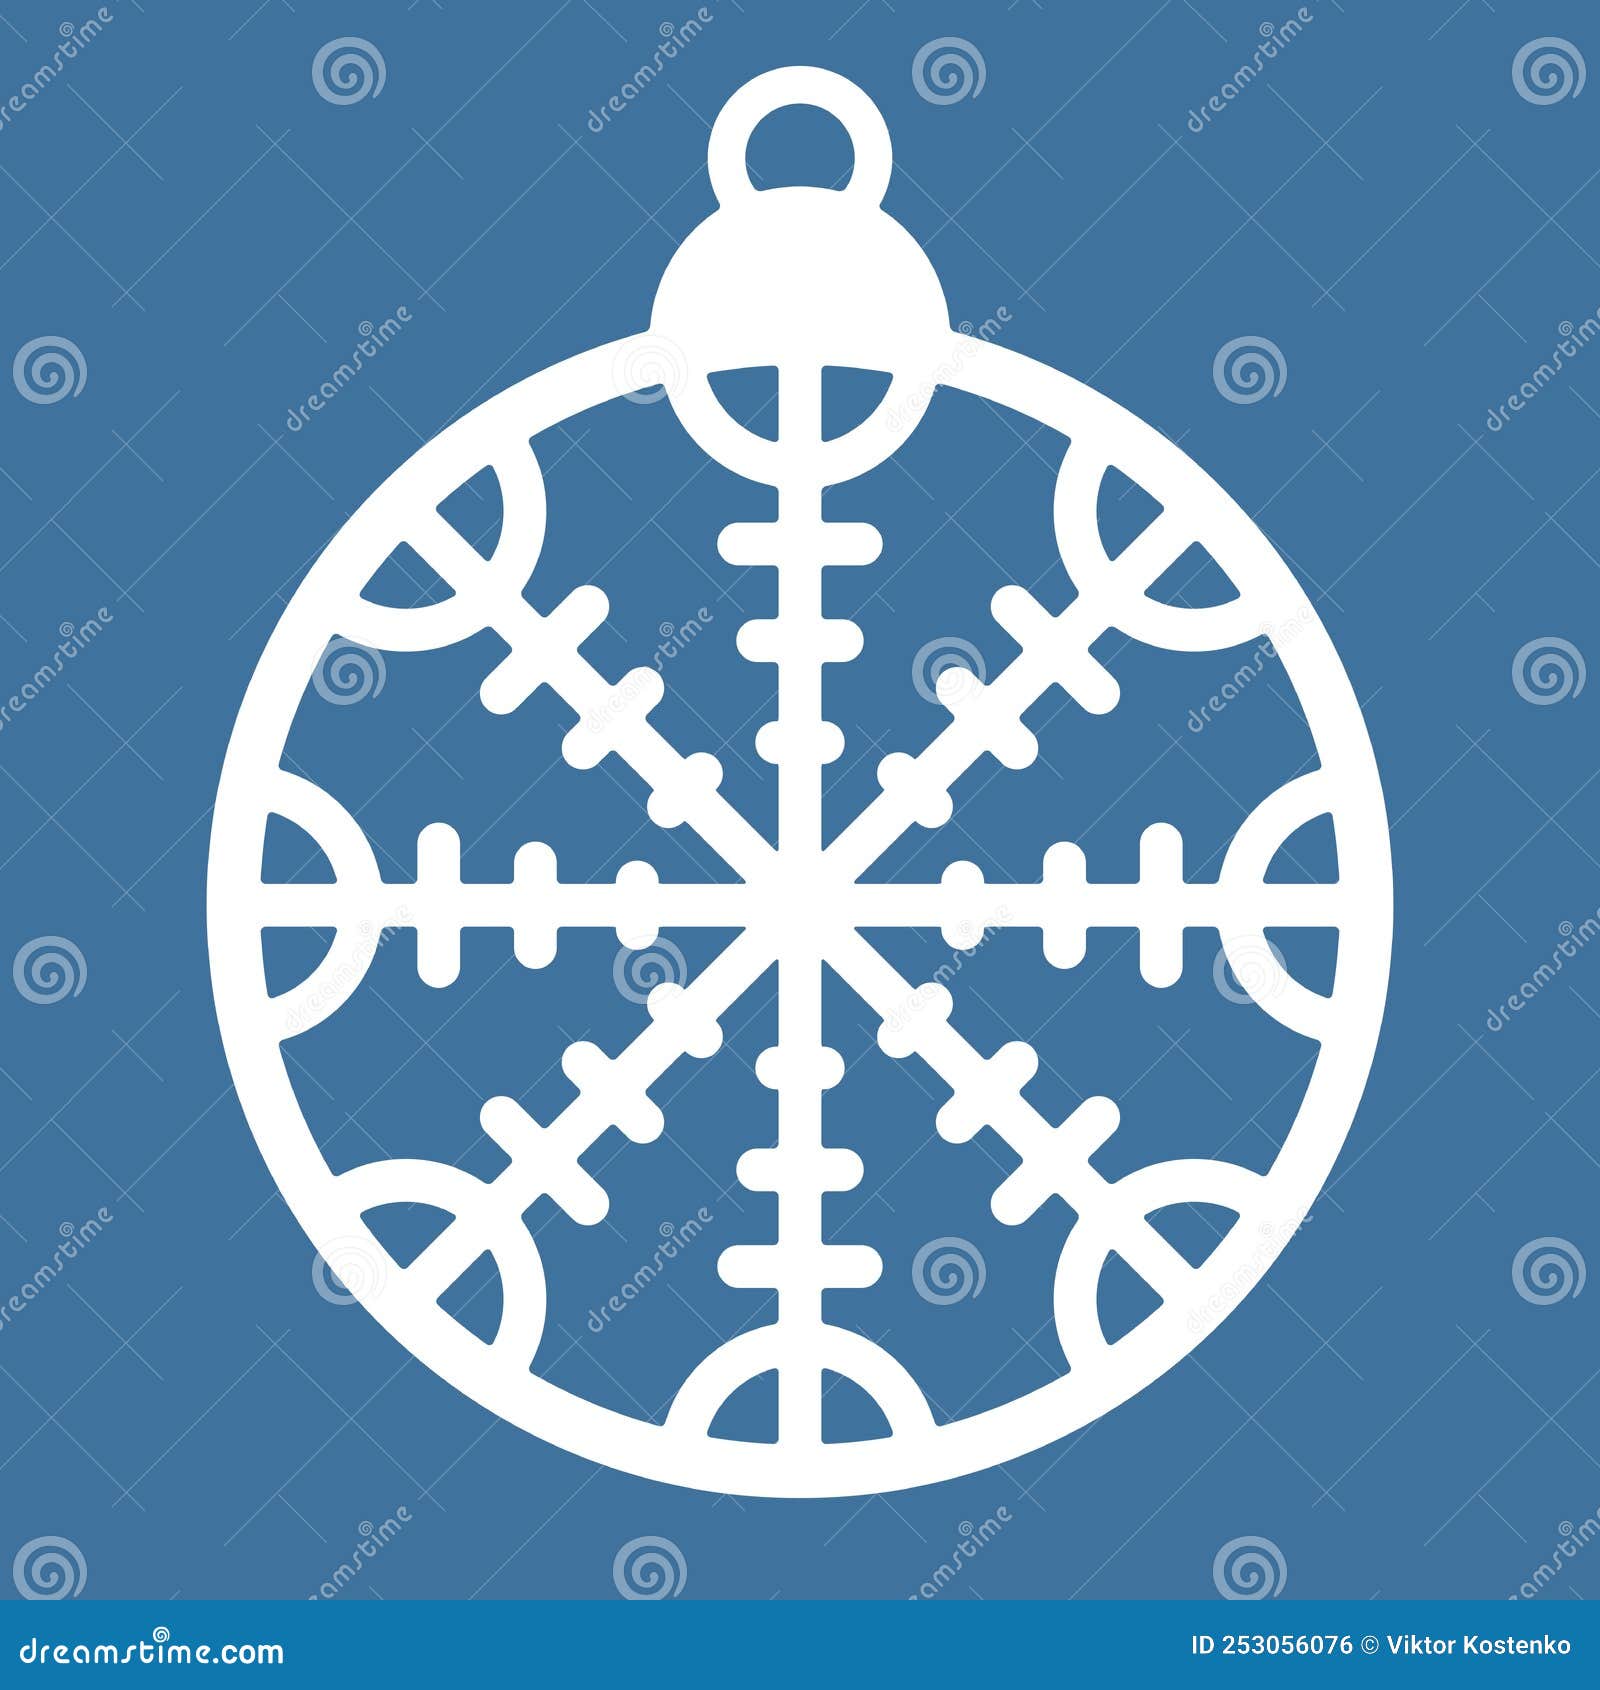 christmas ball with aegishjalmur, helmet of horror. scandinavia vikings amulet for cut out. template for yule festives, new years